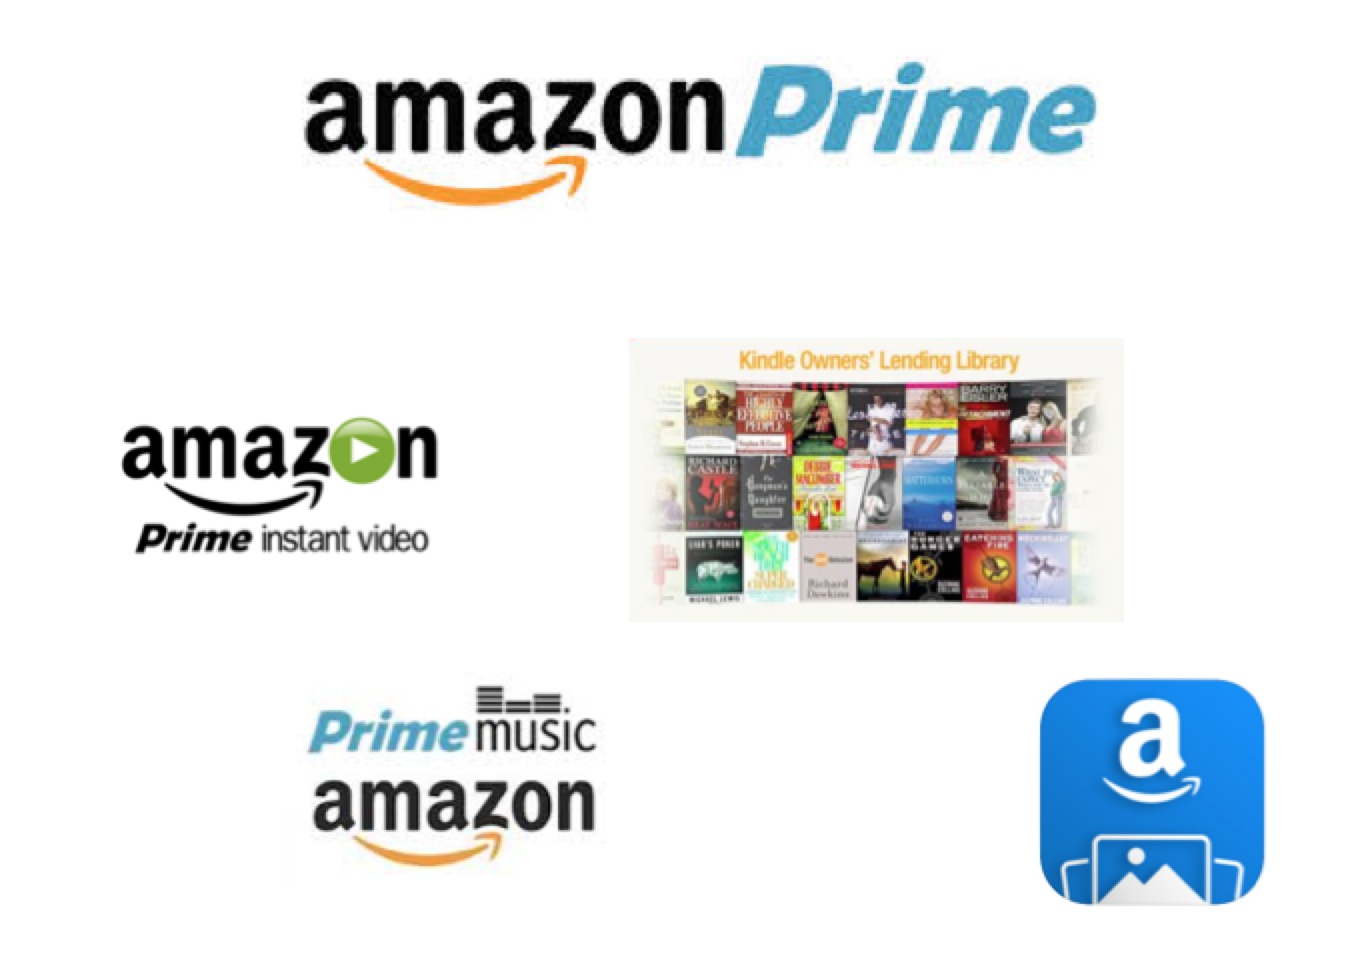 Amazon Prime has been launched with a 60-day free trial